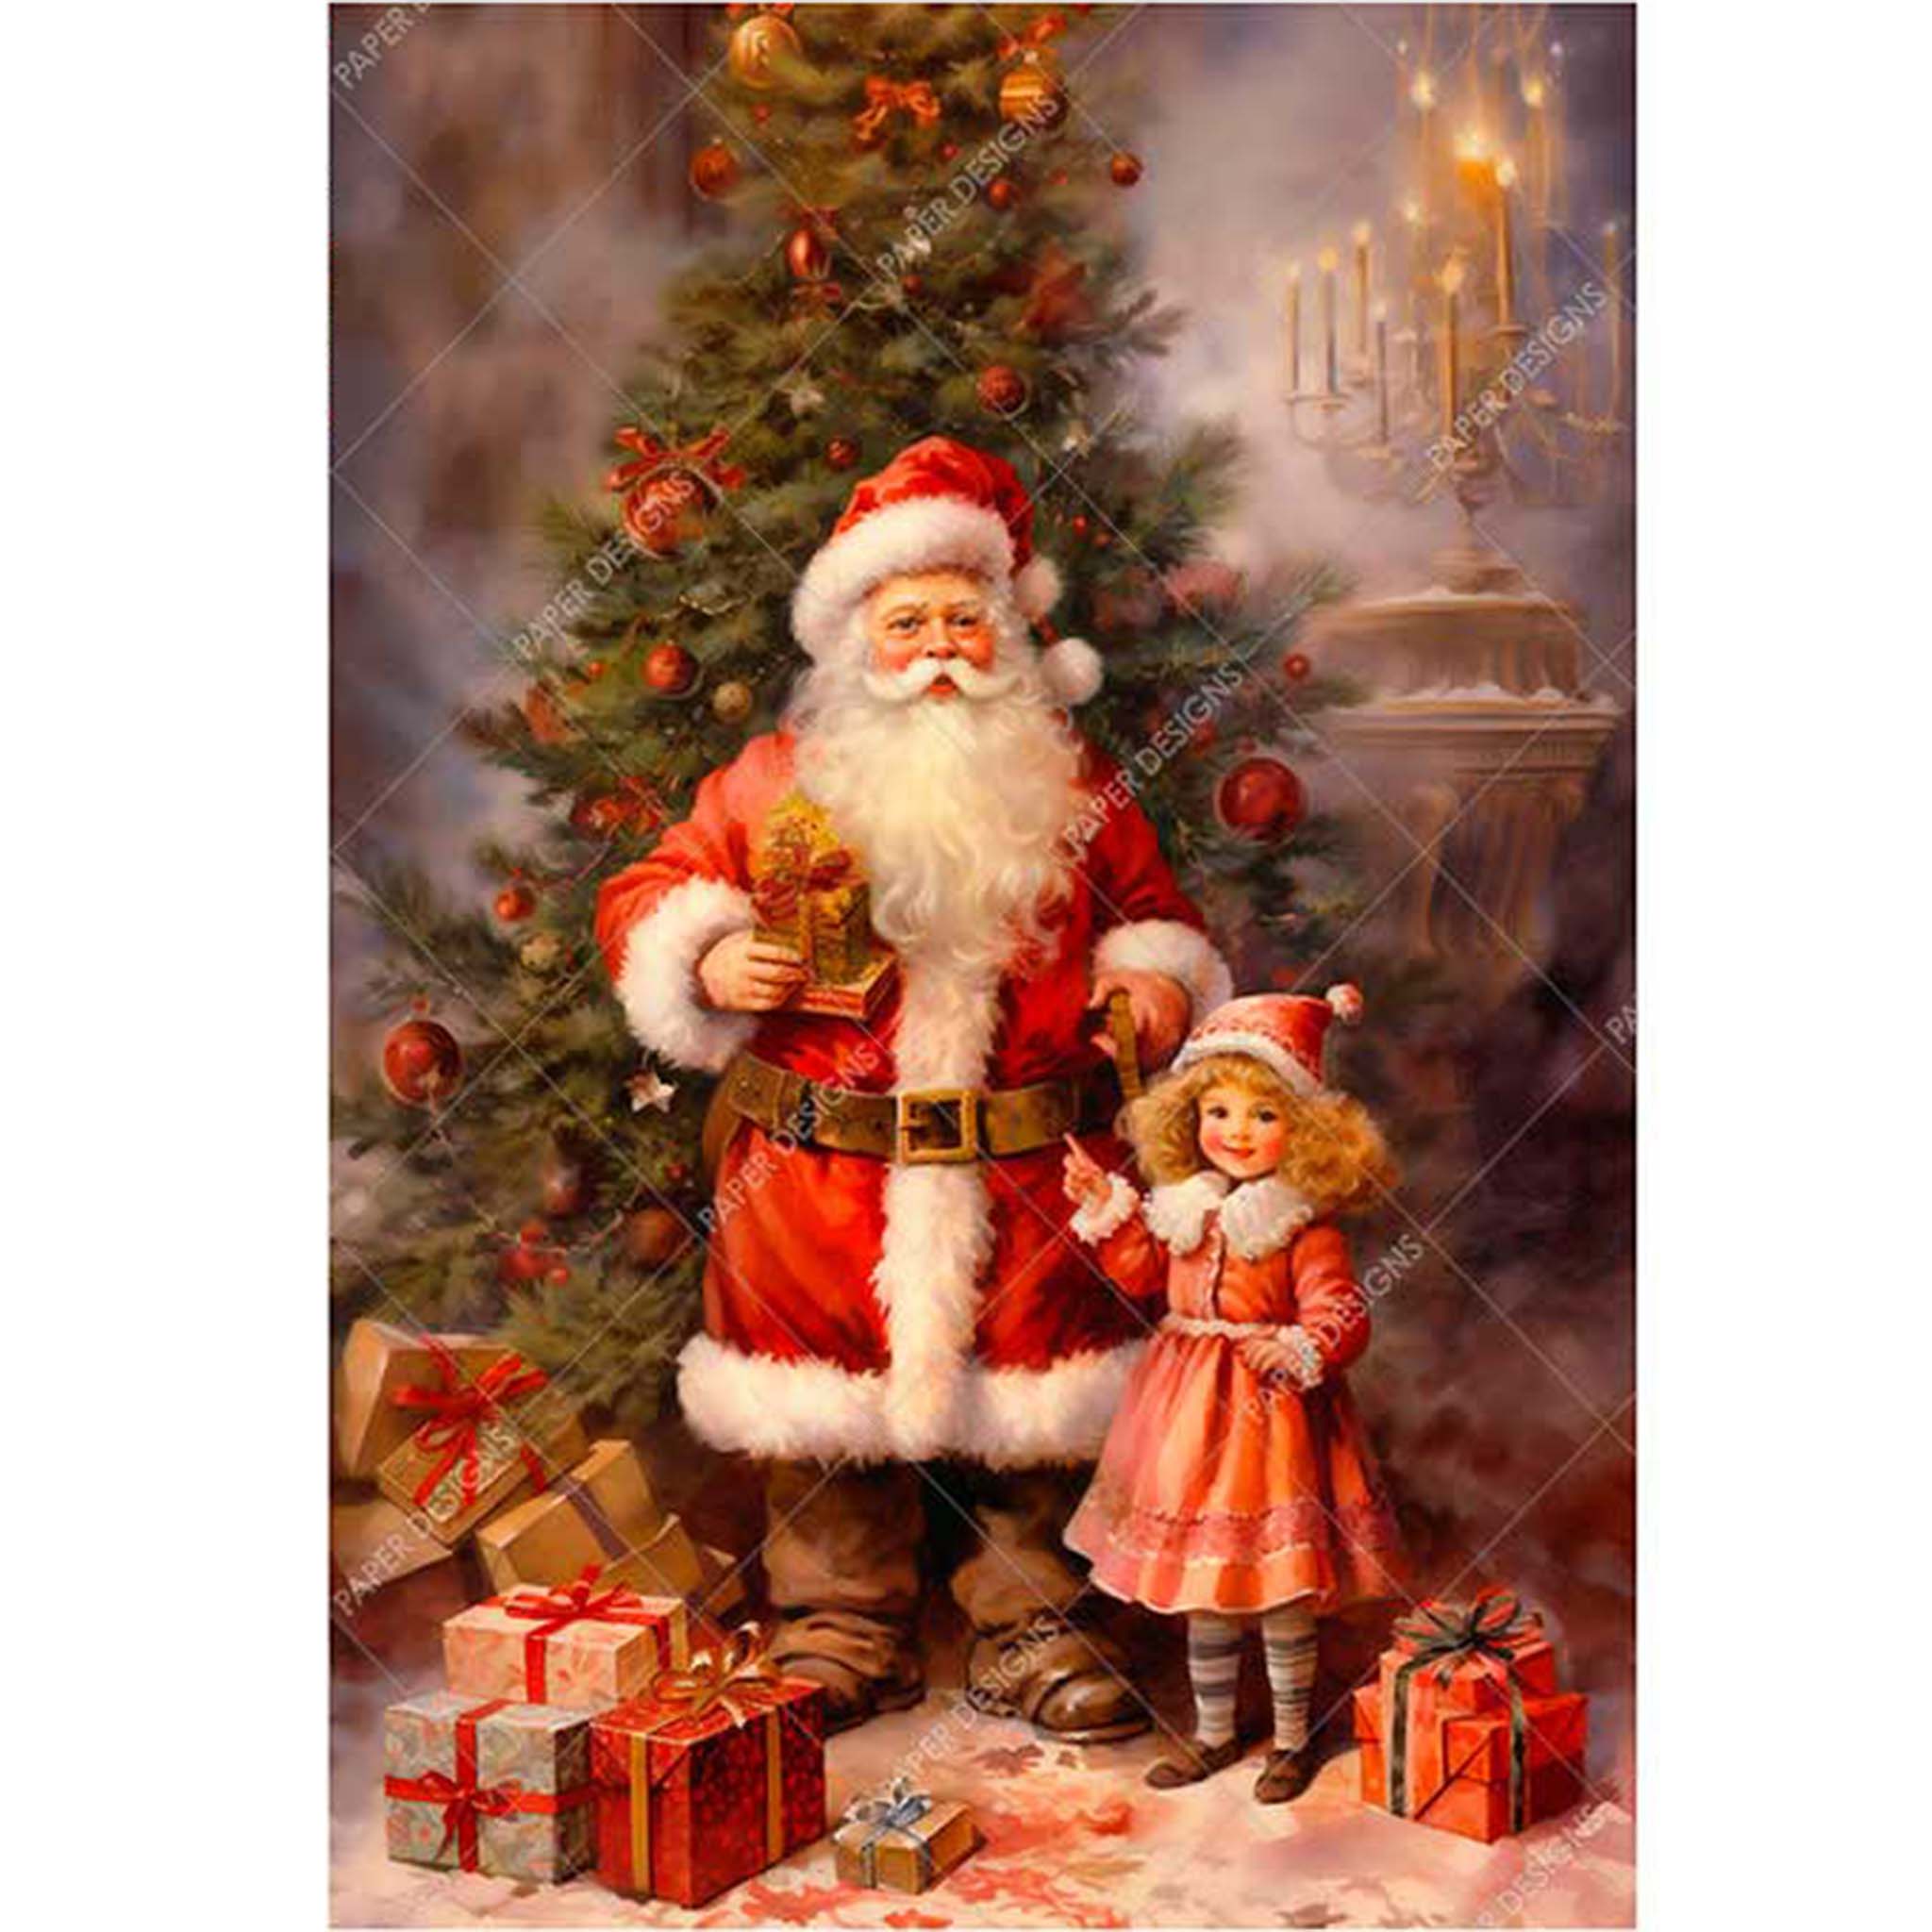 A3 rice paper design featuring a Victorian Santa with an adorable little girl in front of a festive Christmas tree. White borders are on the sides.